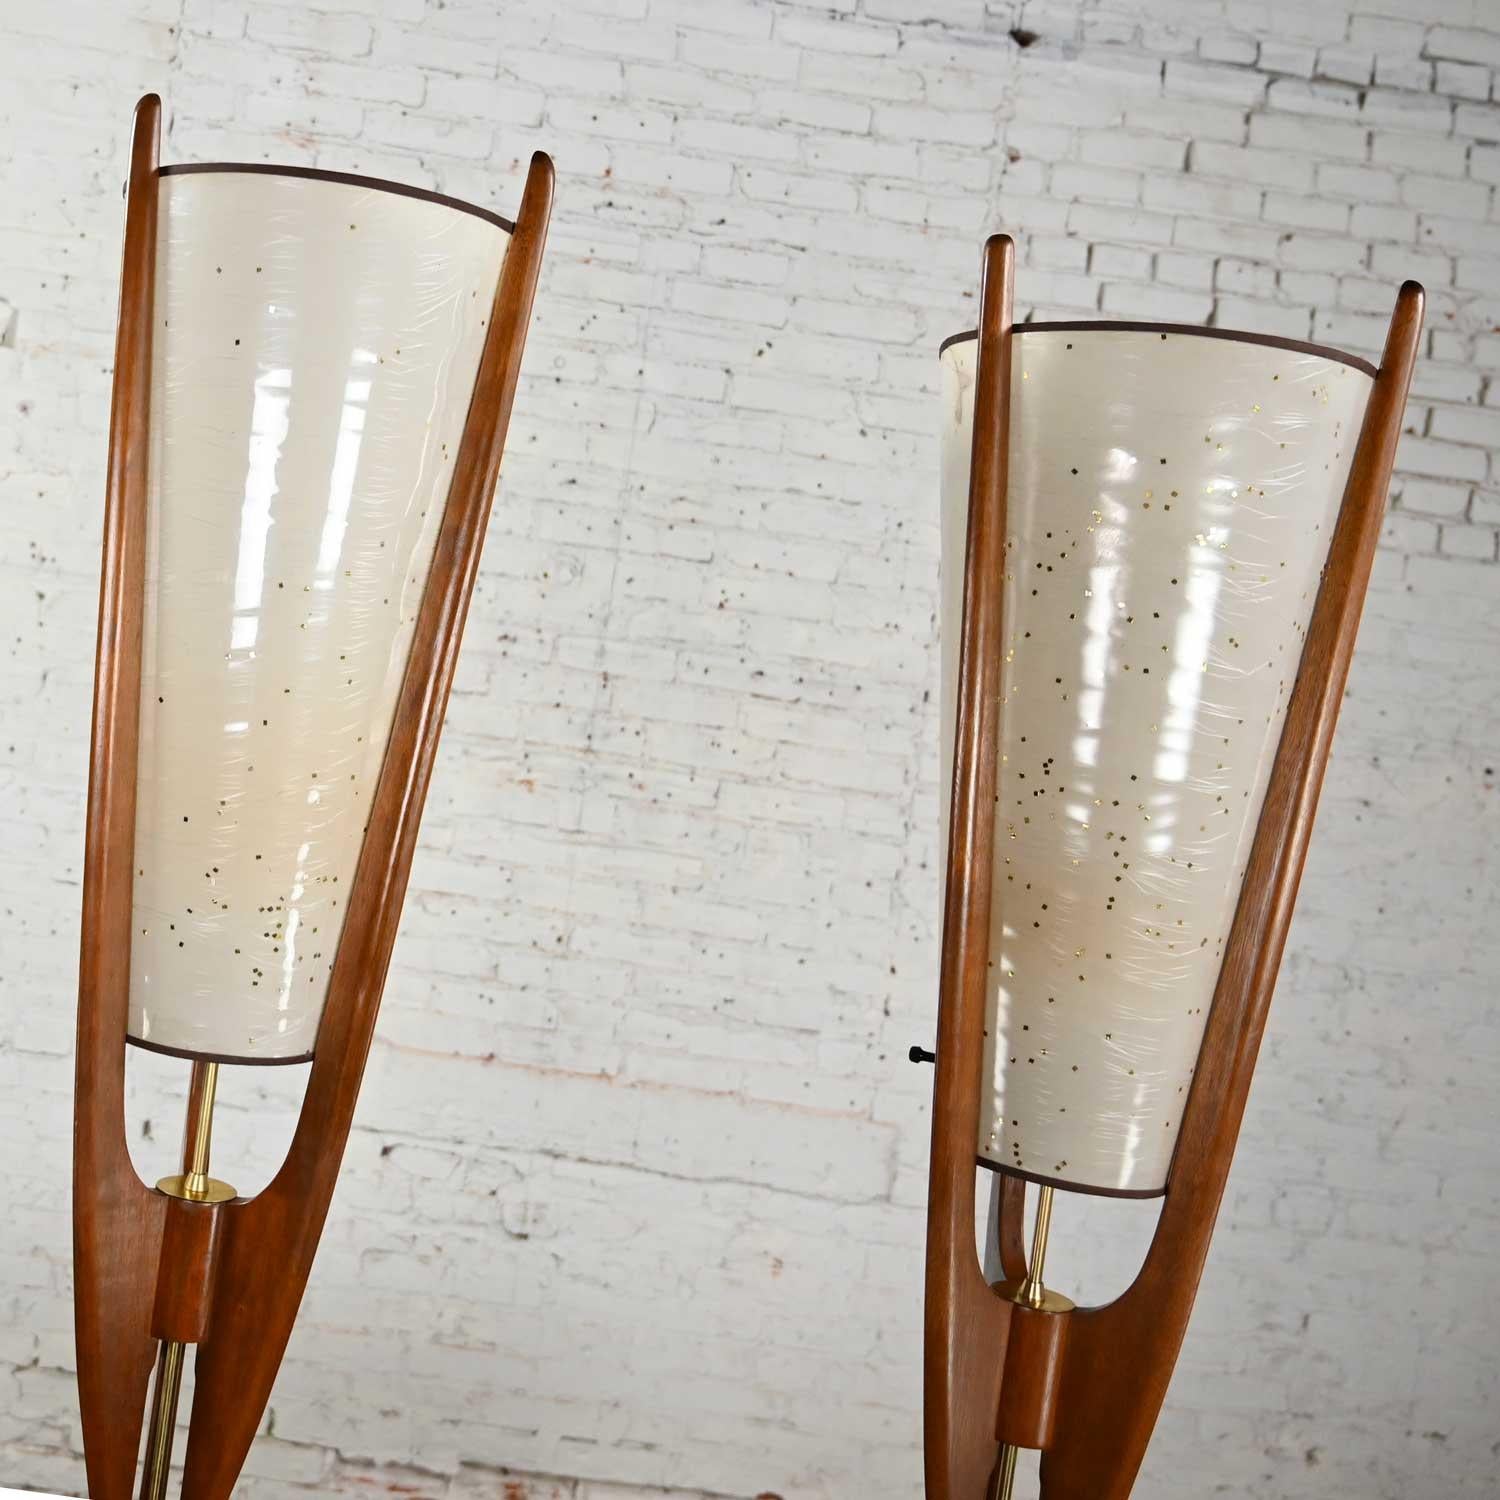 20th Century Vintage Mid Century Modern Sculpted Cone Table Lamps Arthur Jacobs for Modeline